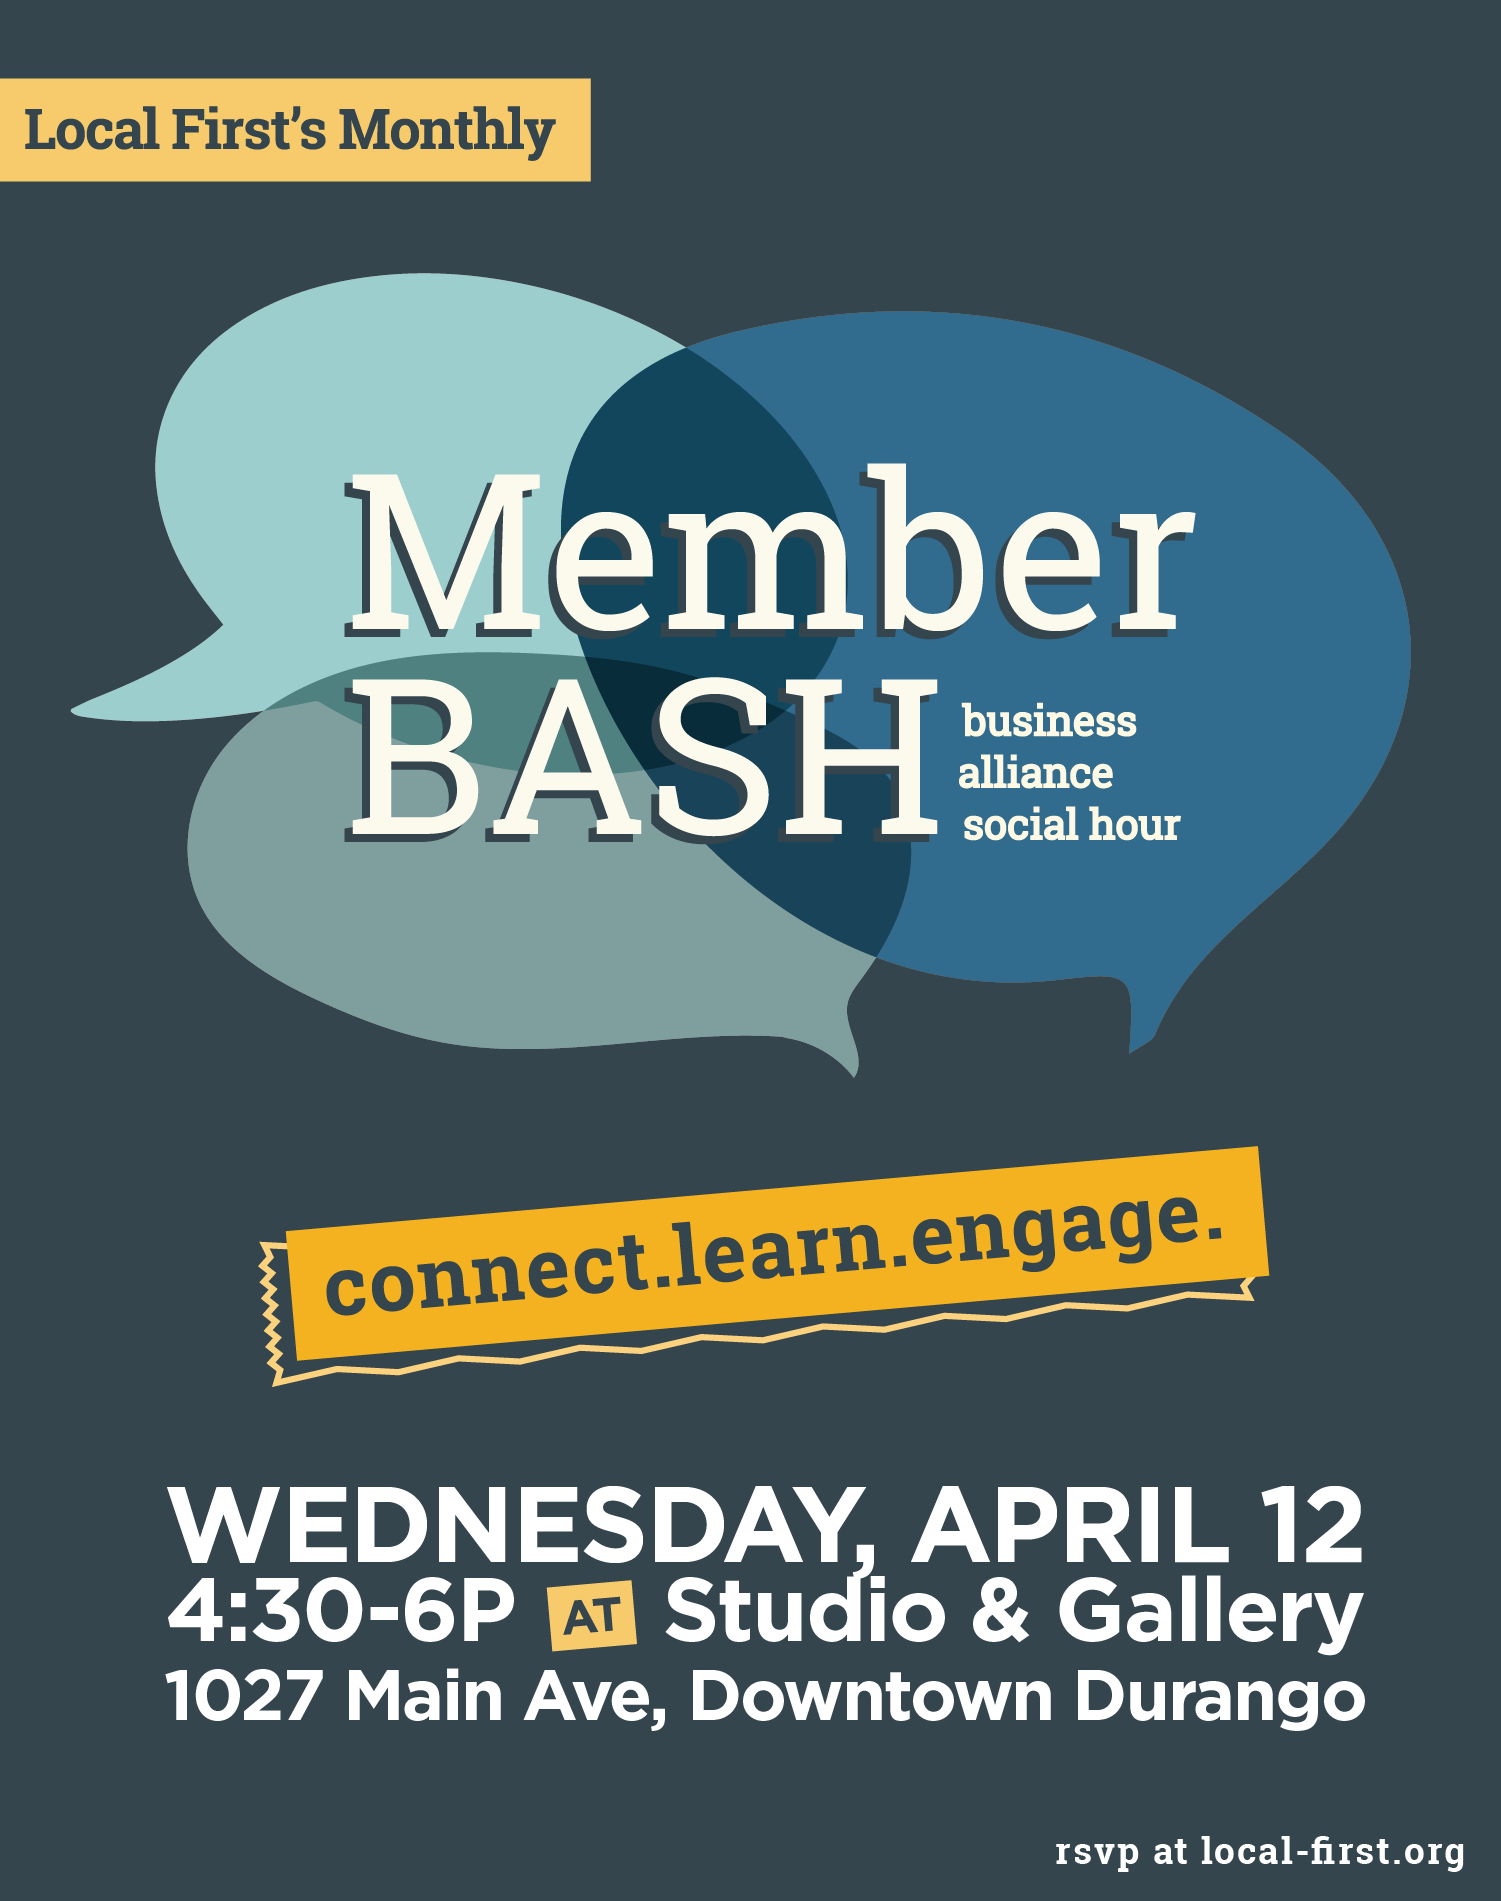 Local Business Networking event information reading: Local First Member Business Alliance Social Hour. Wednesday April 8th 4:30 to 6 pm at Studio and Gallery